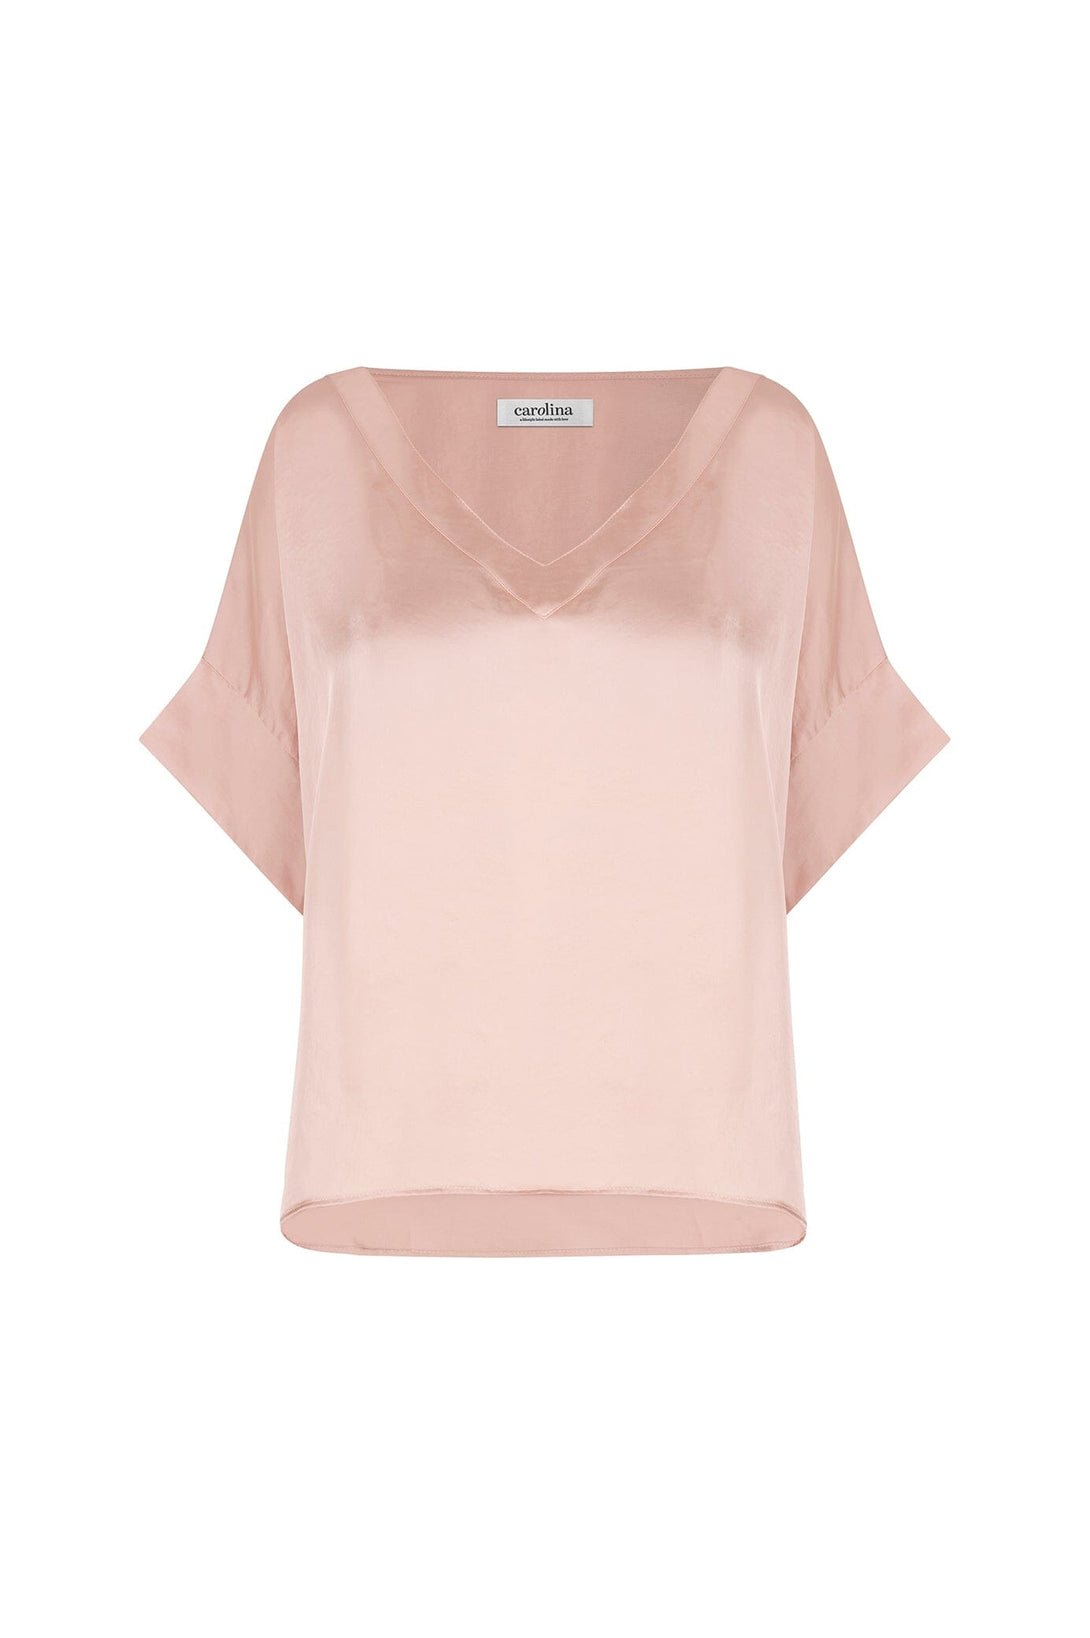 Bianca Short Sleeve Top Champagne with V Neck Tops